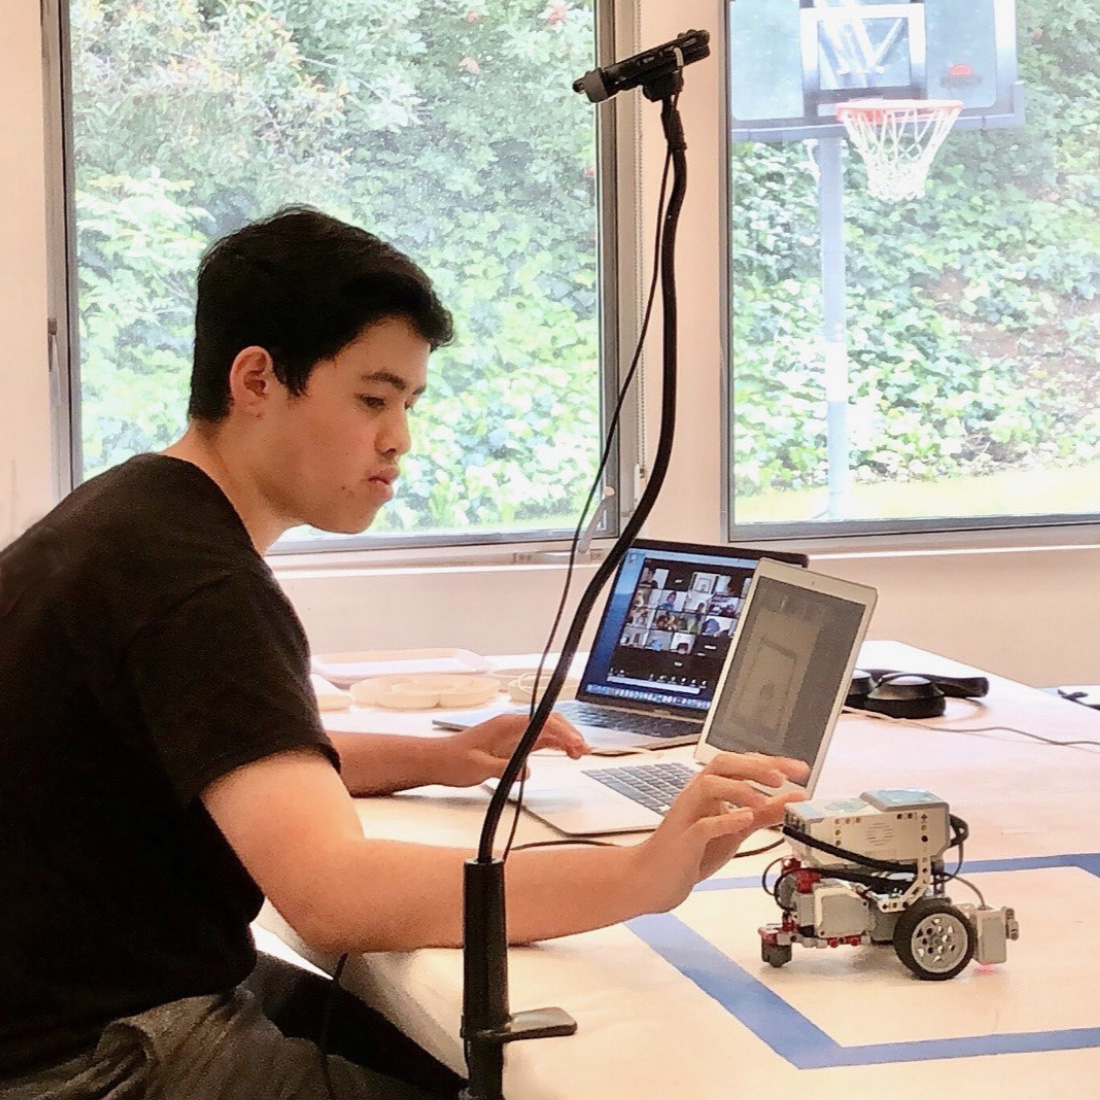 A student working at a desk with a laptop and a small robot.